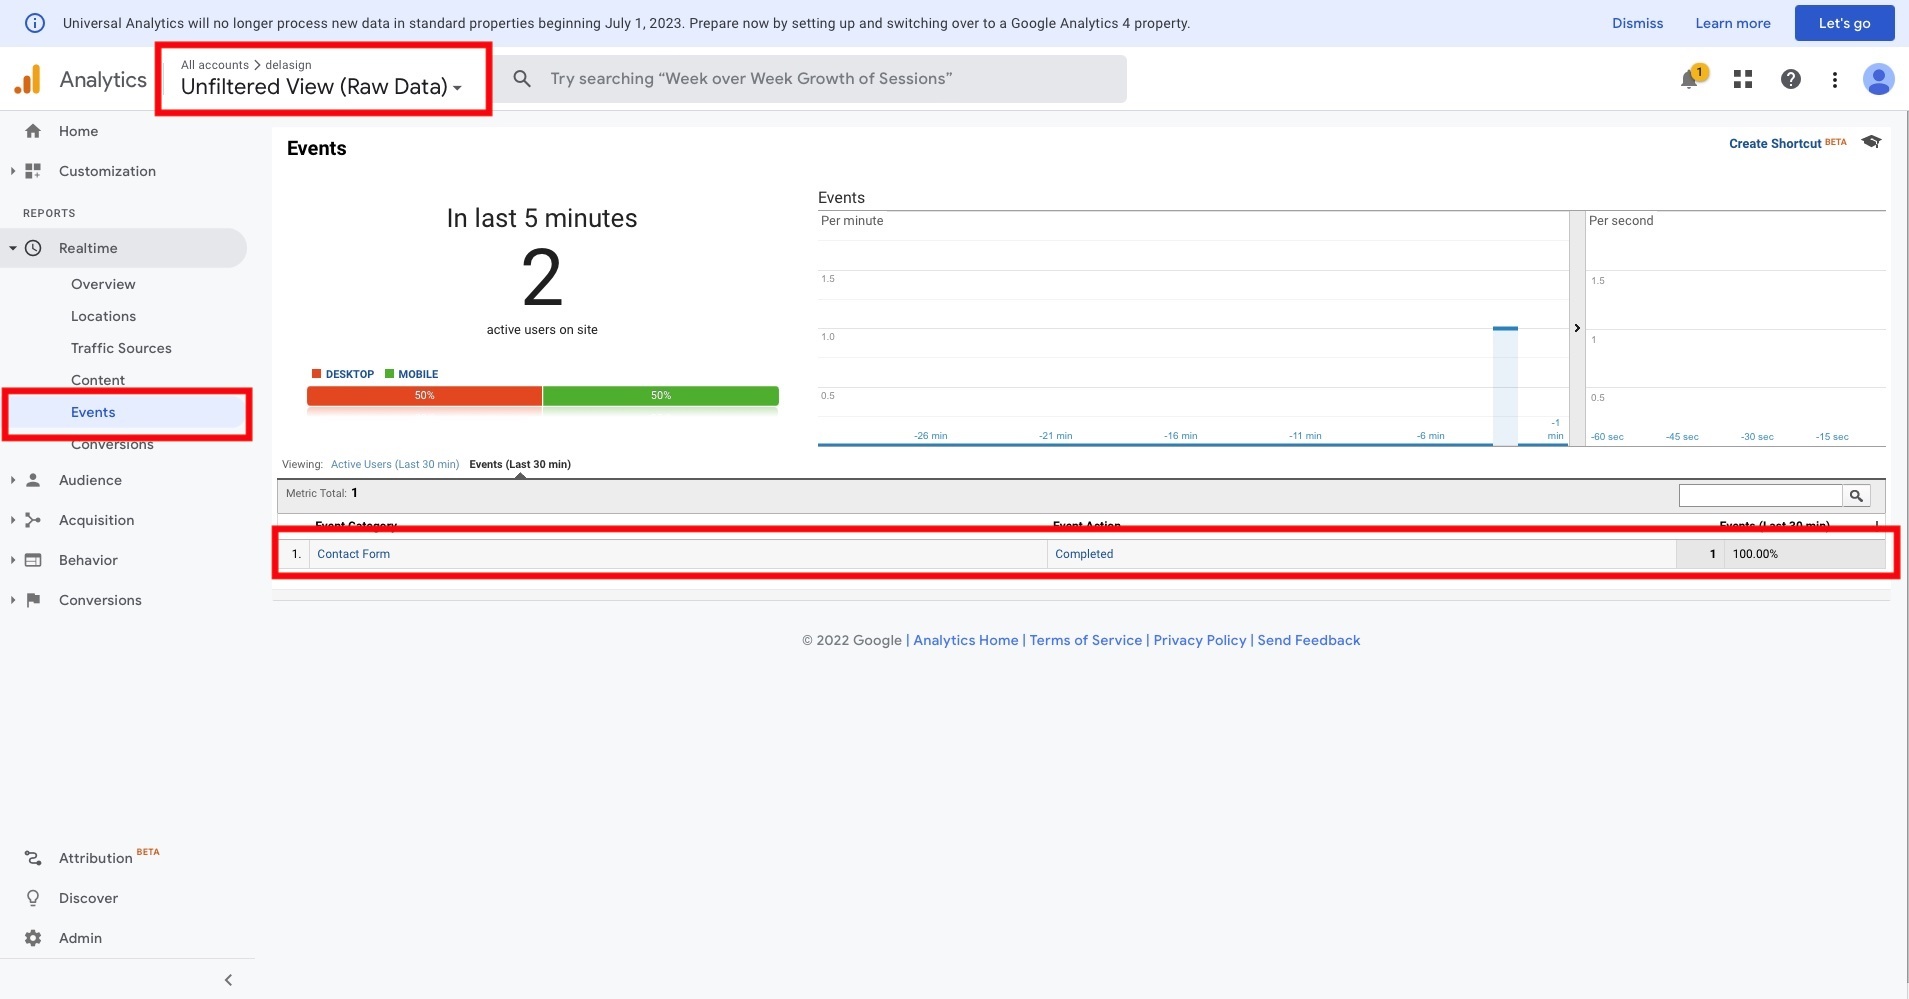 A screenshot of Google Analytics (UA) with the custom event showing in real time.